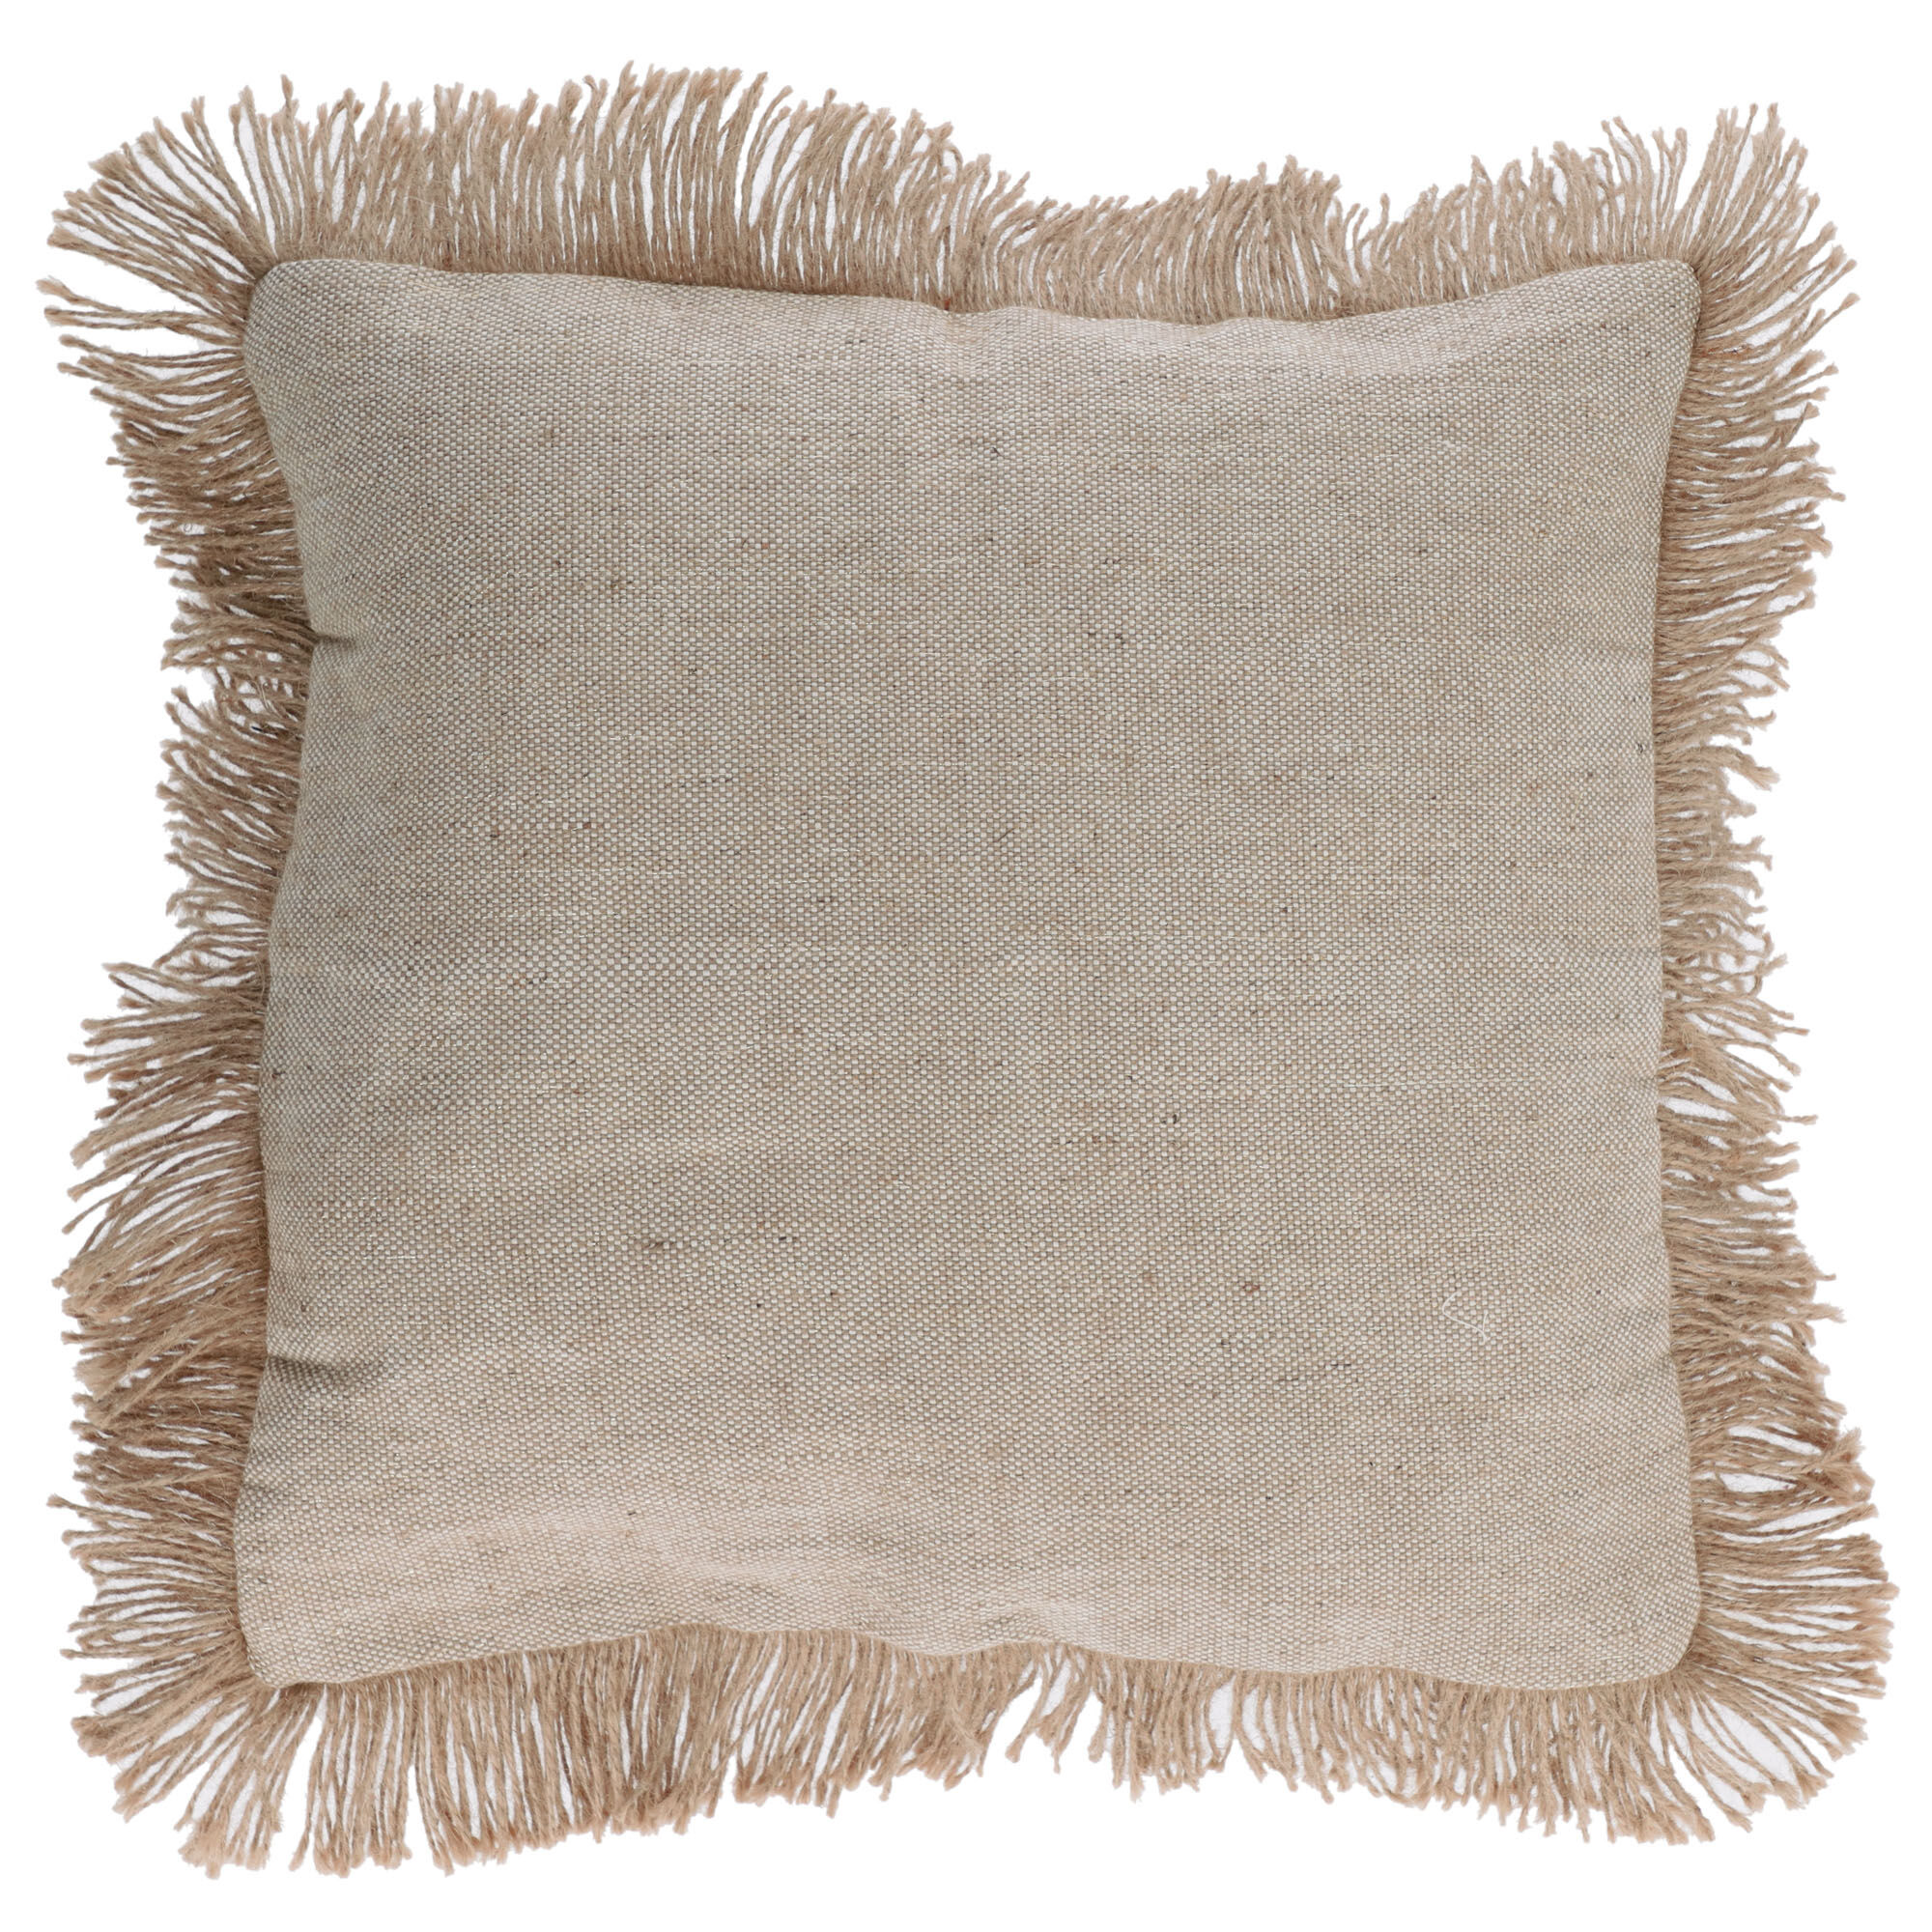 Kave Home Delcie cotton and jute cushion cover with beige tassels 60 x 60 cm